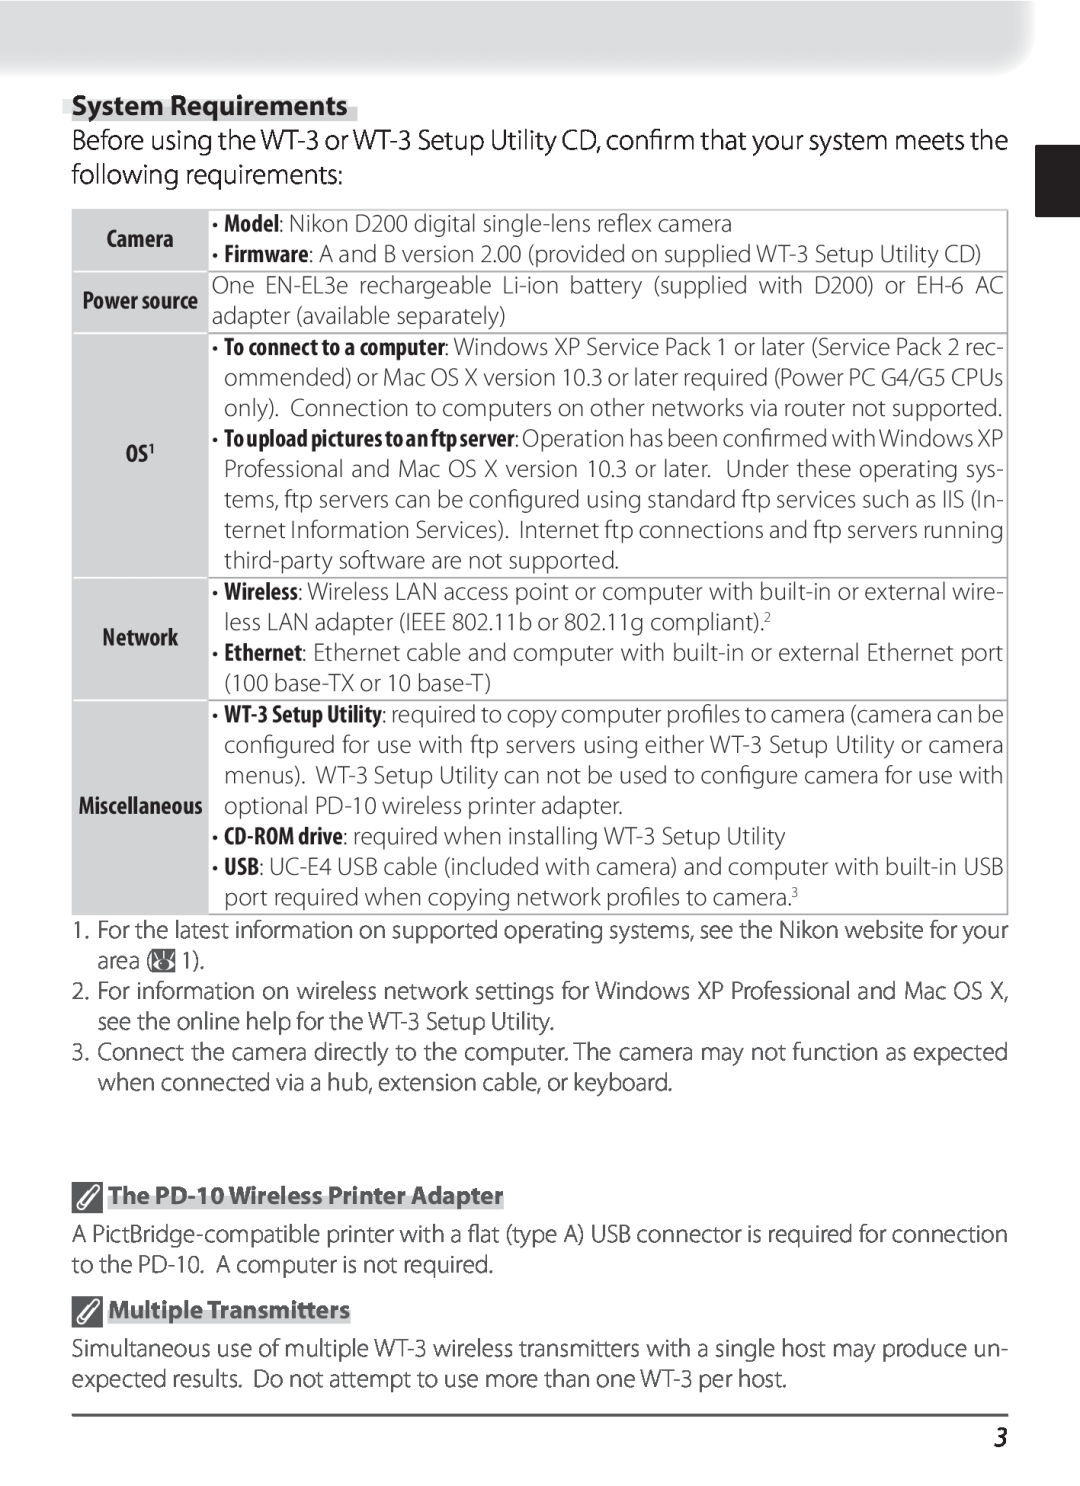 Nikon WT-3 user manual System Requirements, The PD-10 Wireless Printer Adapter, Multiple Transmitters 